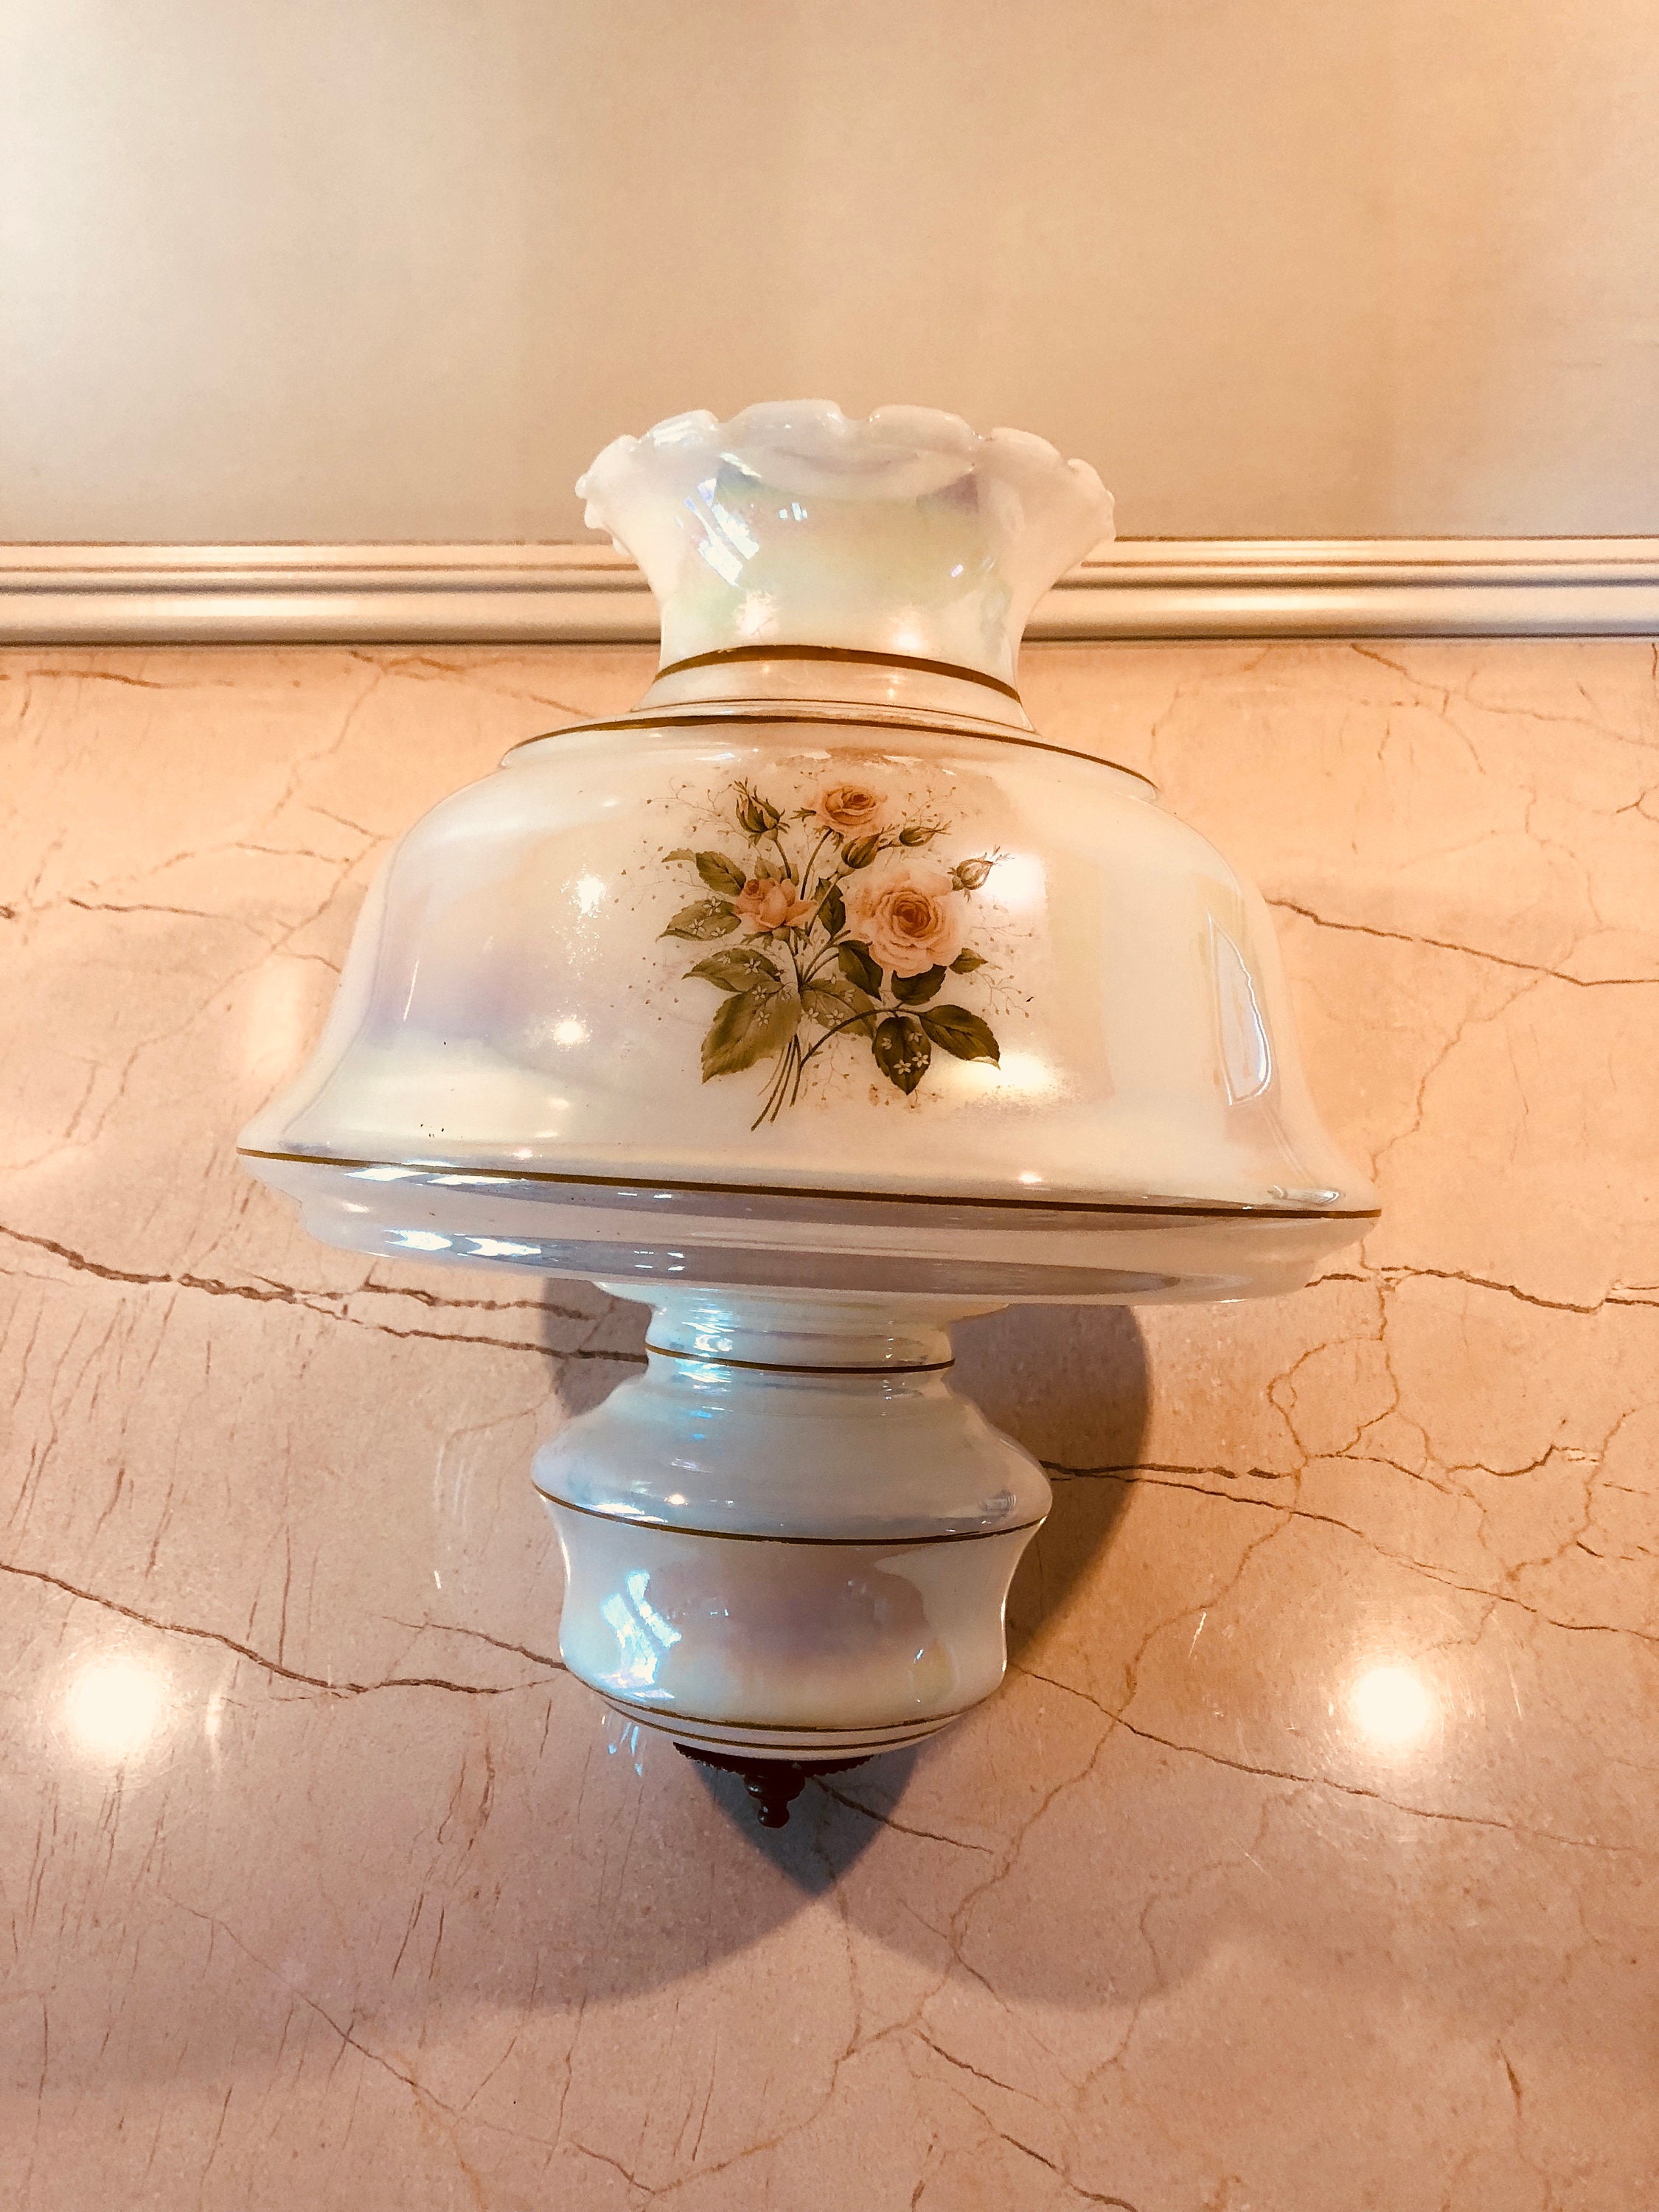 Vintage Set Of 2 Hurricane Lamp Roses Design With 3 Way Electric Lighting  for Sale in Tampa, FL - OfferUp